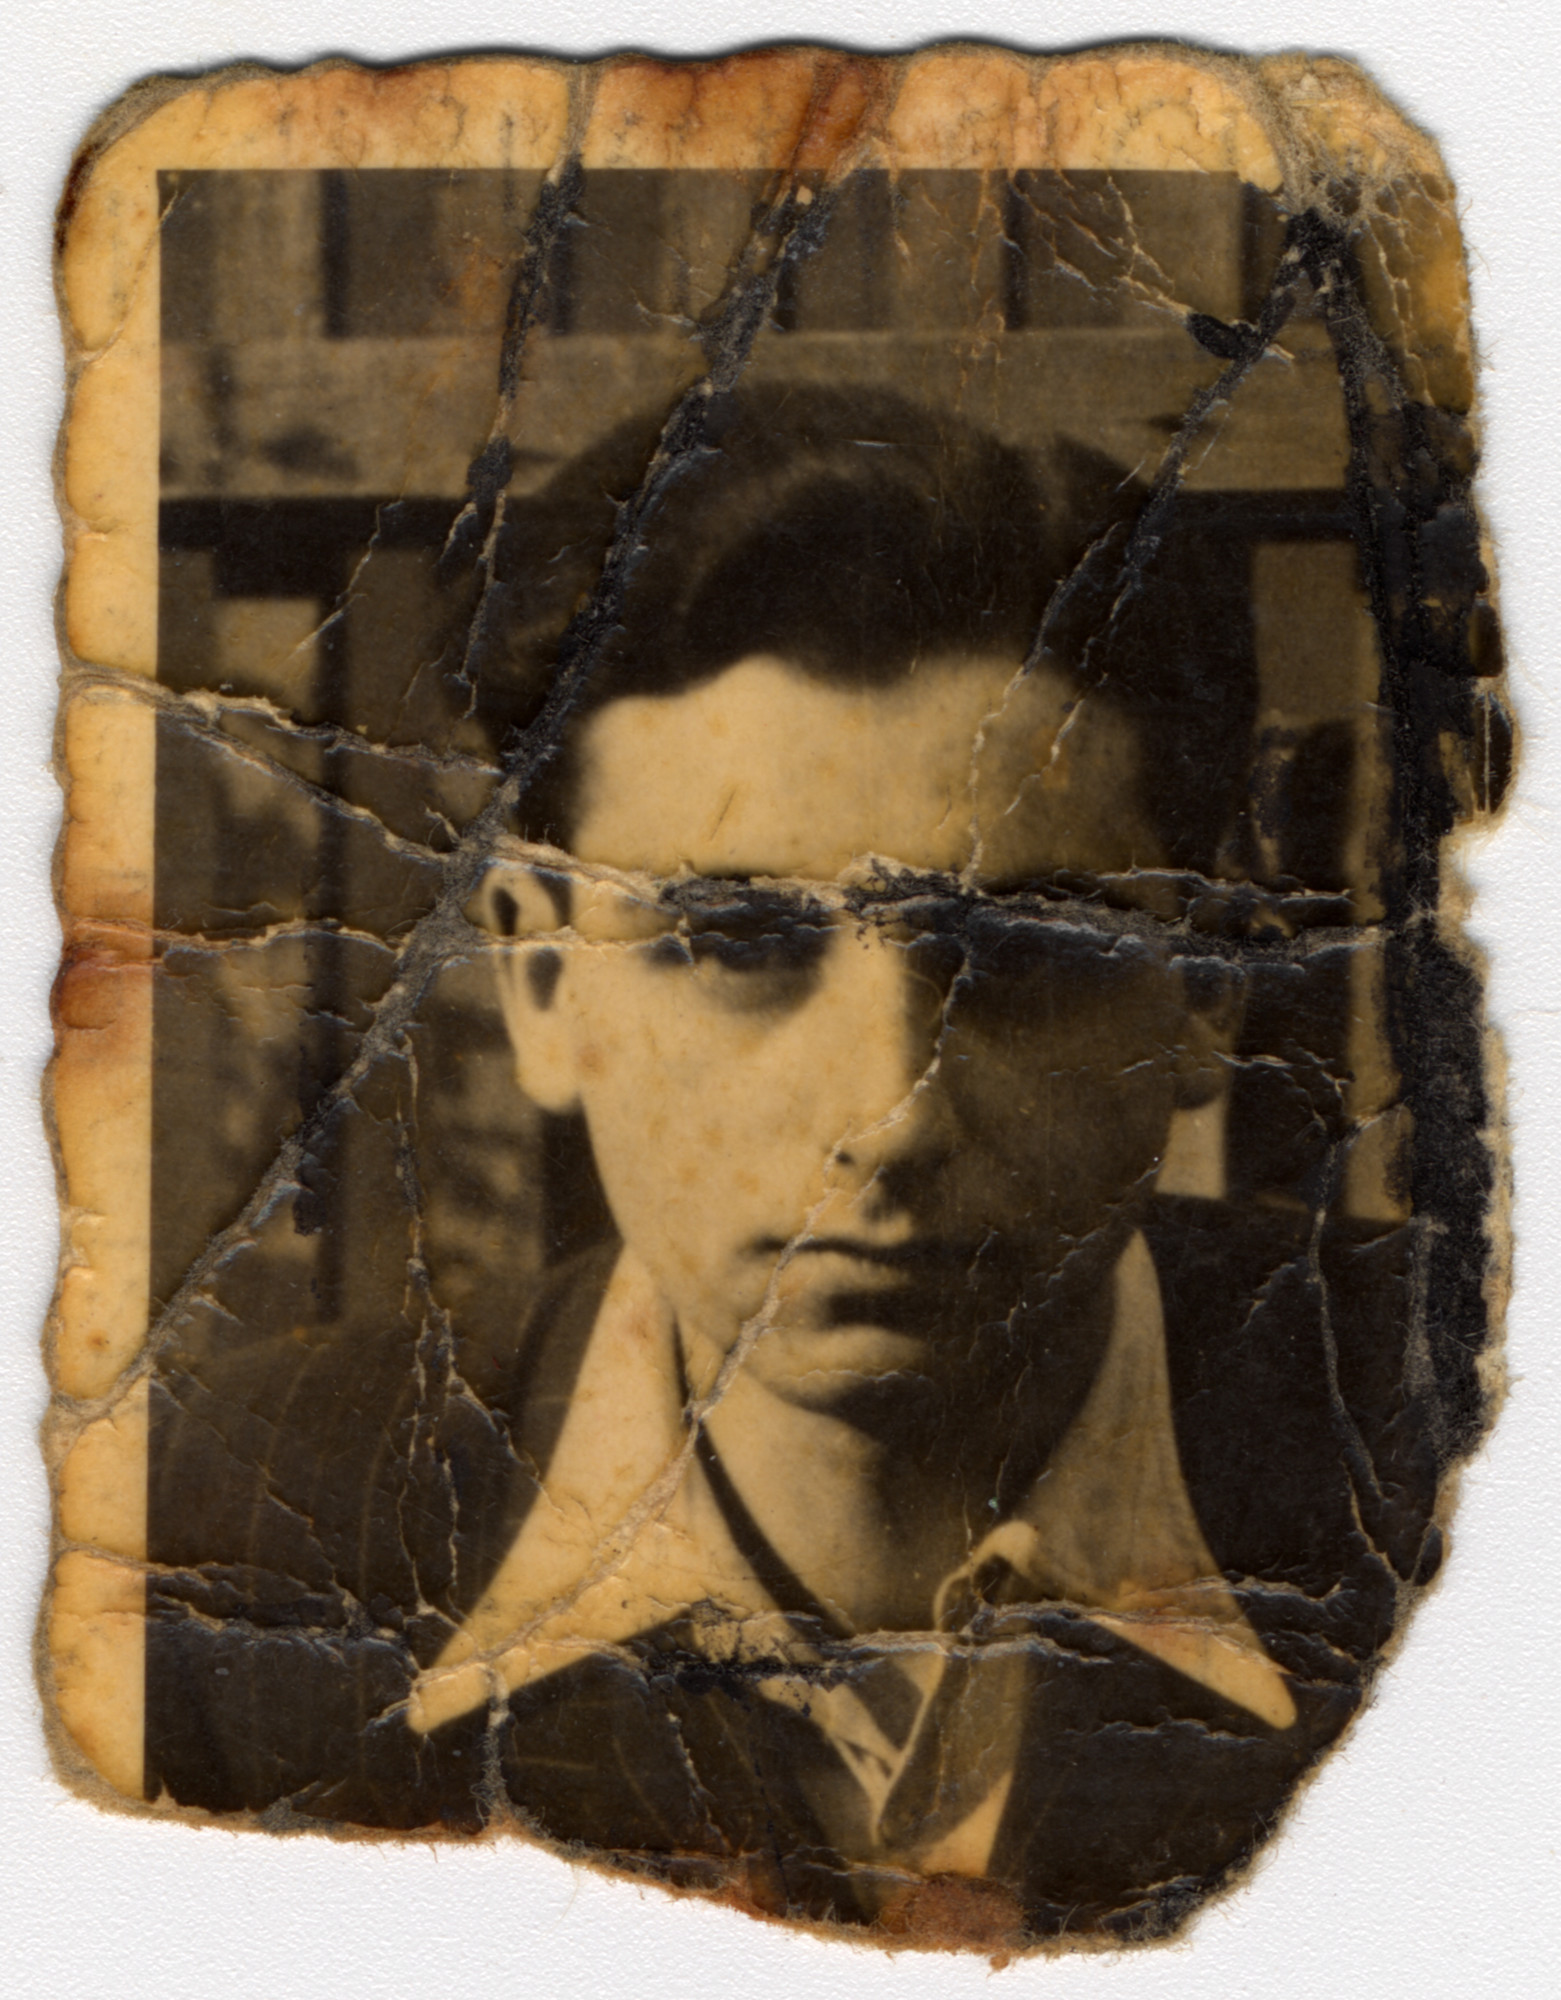 Close-up portrait of a young man in the Bedzin ghetto. 

Pictured is Alex Lieberman, donor's brother-in-law.  The portrait was found in "Kanada" section in Birkenau in 1944 and brought to his mother, Rosa Lieberman.  Rosa hid this photograph in her mouth through every selection and search during her imprisonment in Birkenau, and she later carried it with her on death marches to Ravensbrueck and Neustadt-Gleve.